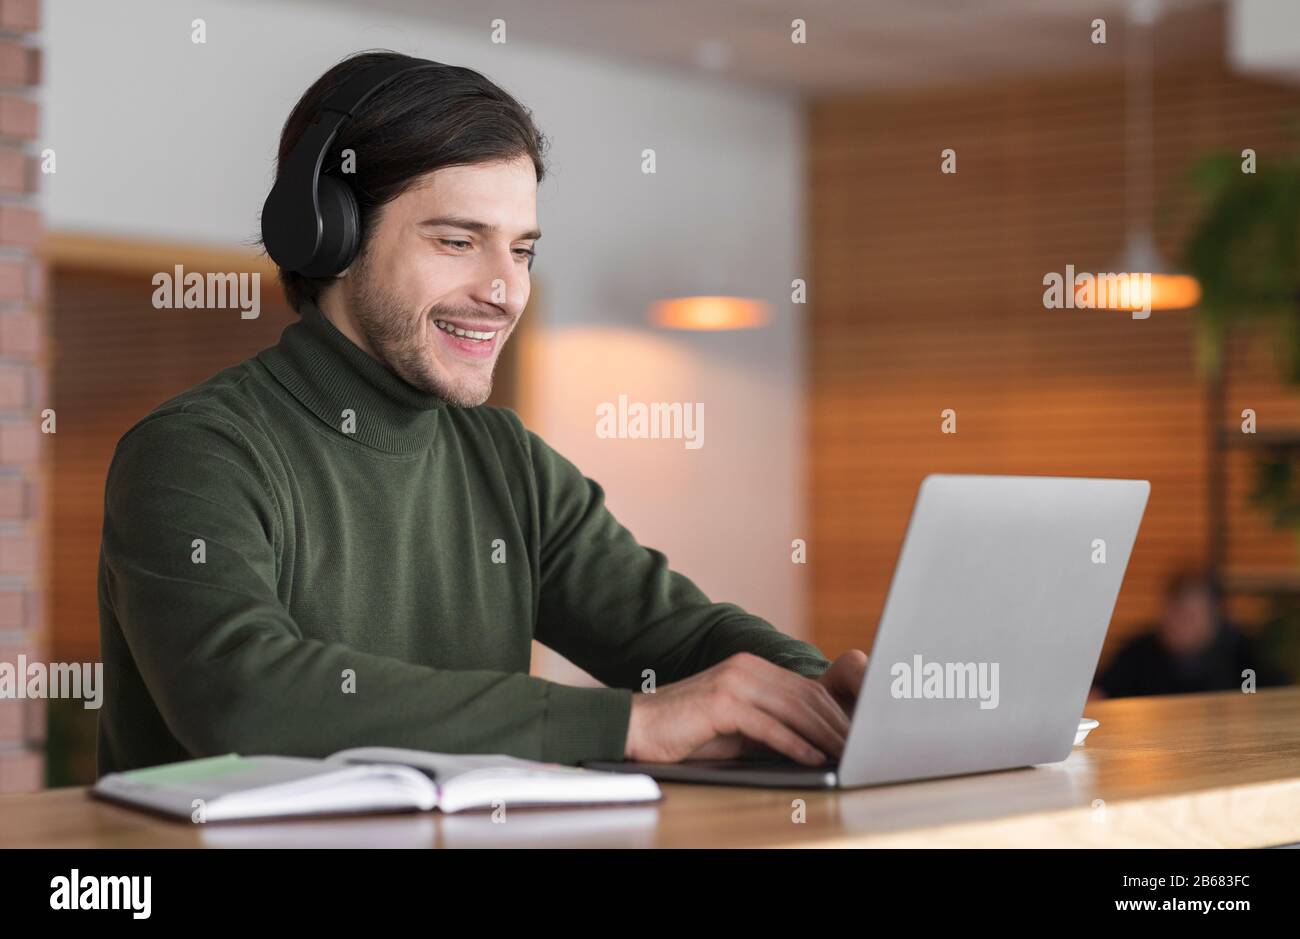 Young positive man in wireless headphones studying online on laptop Stock Photo